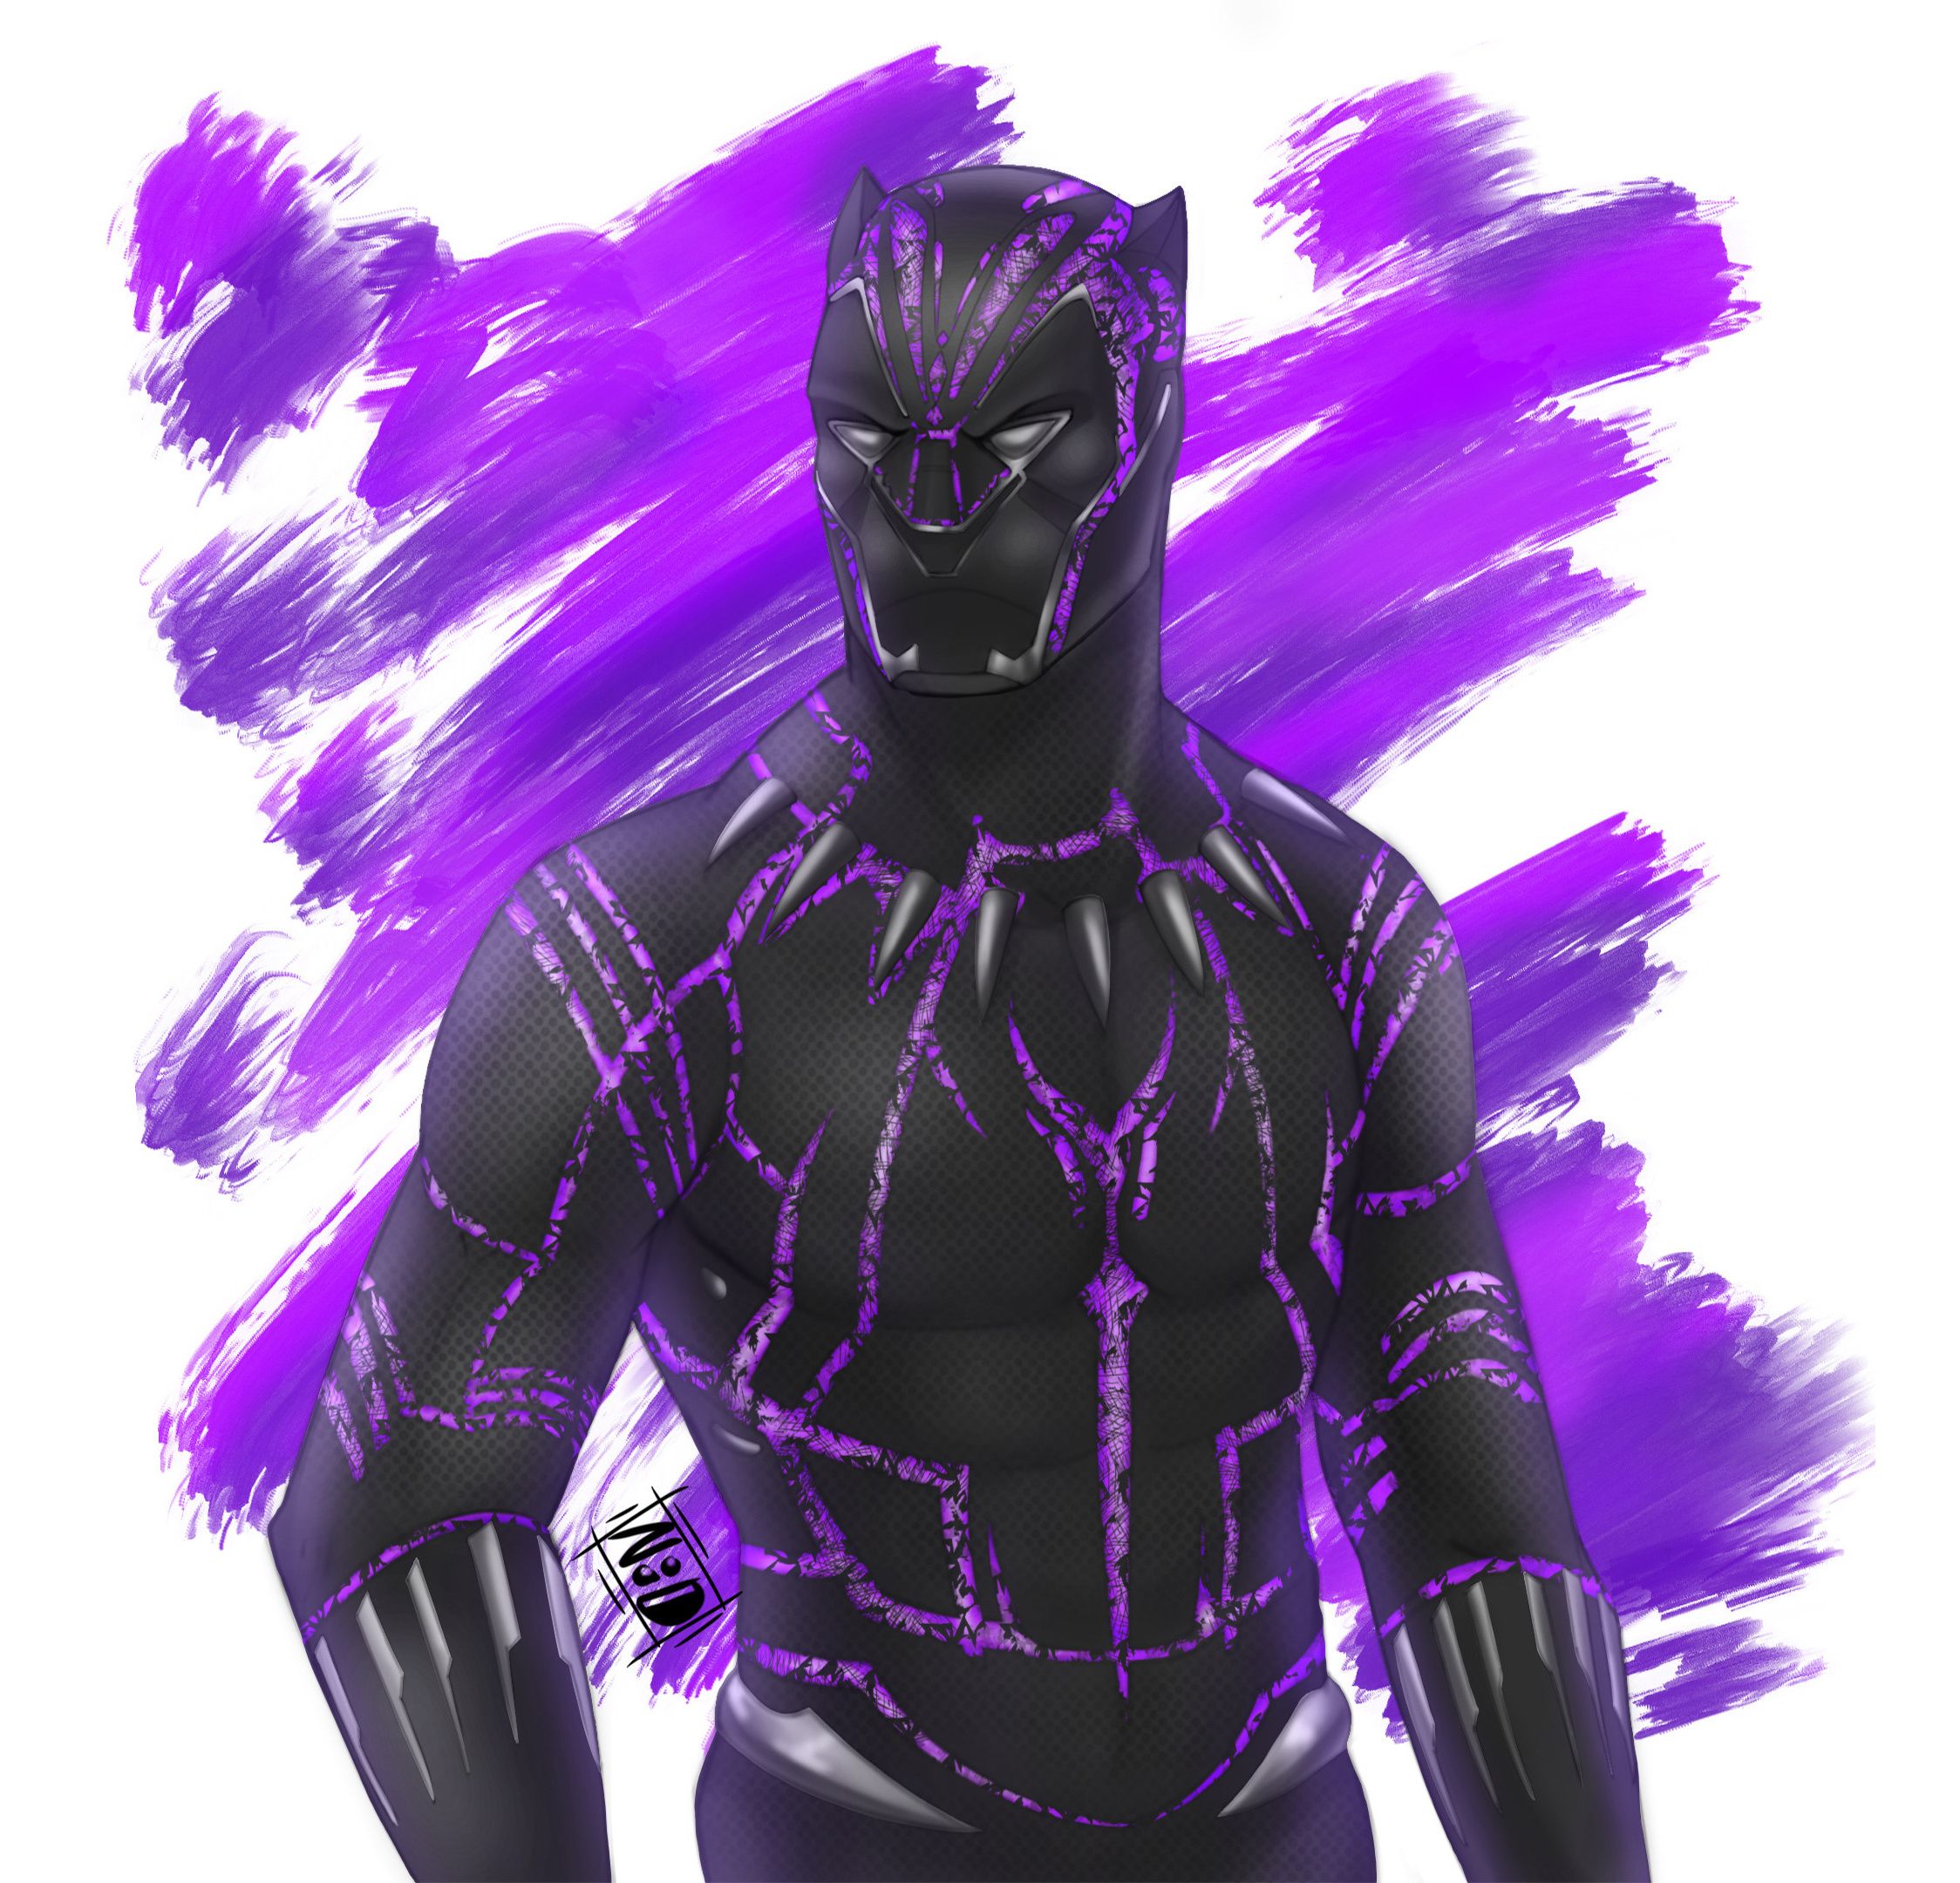 Black Panther” by Andres Barrera - Nerds Love Art